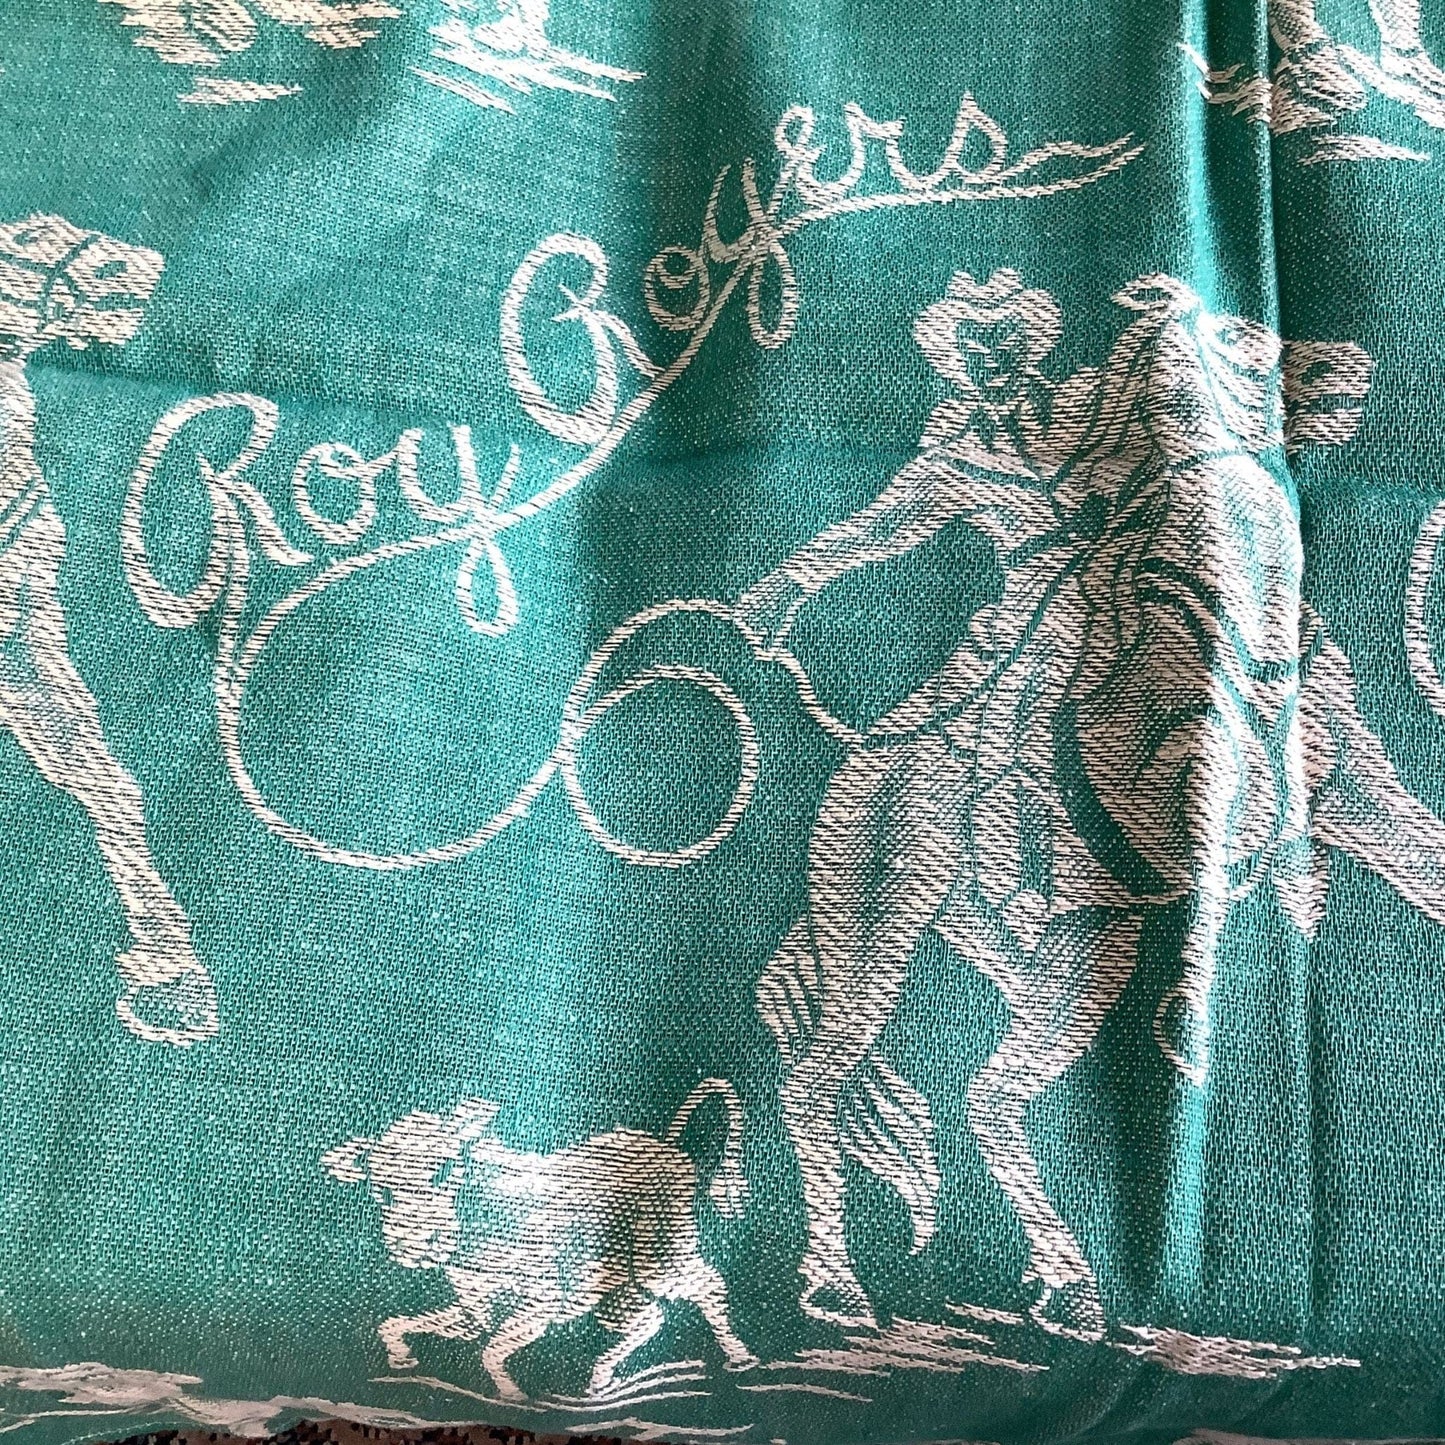 Roy Rogers Themed Bedspread Multi / Cotton / Vintage 1950s